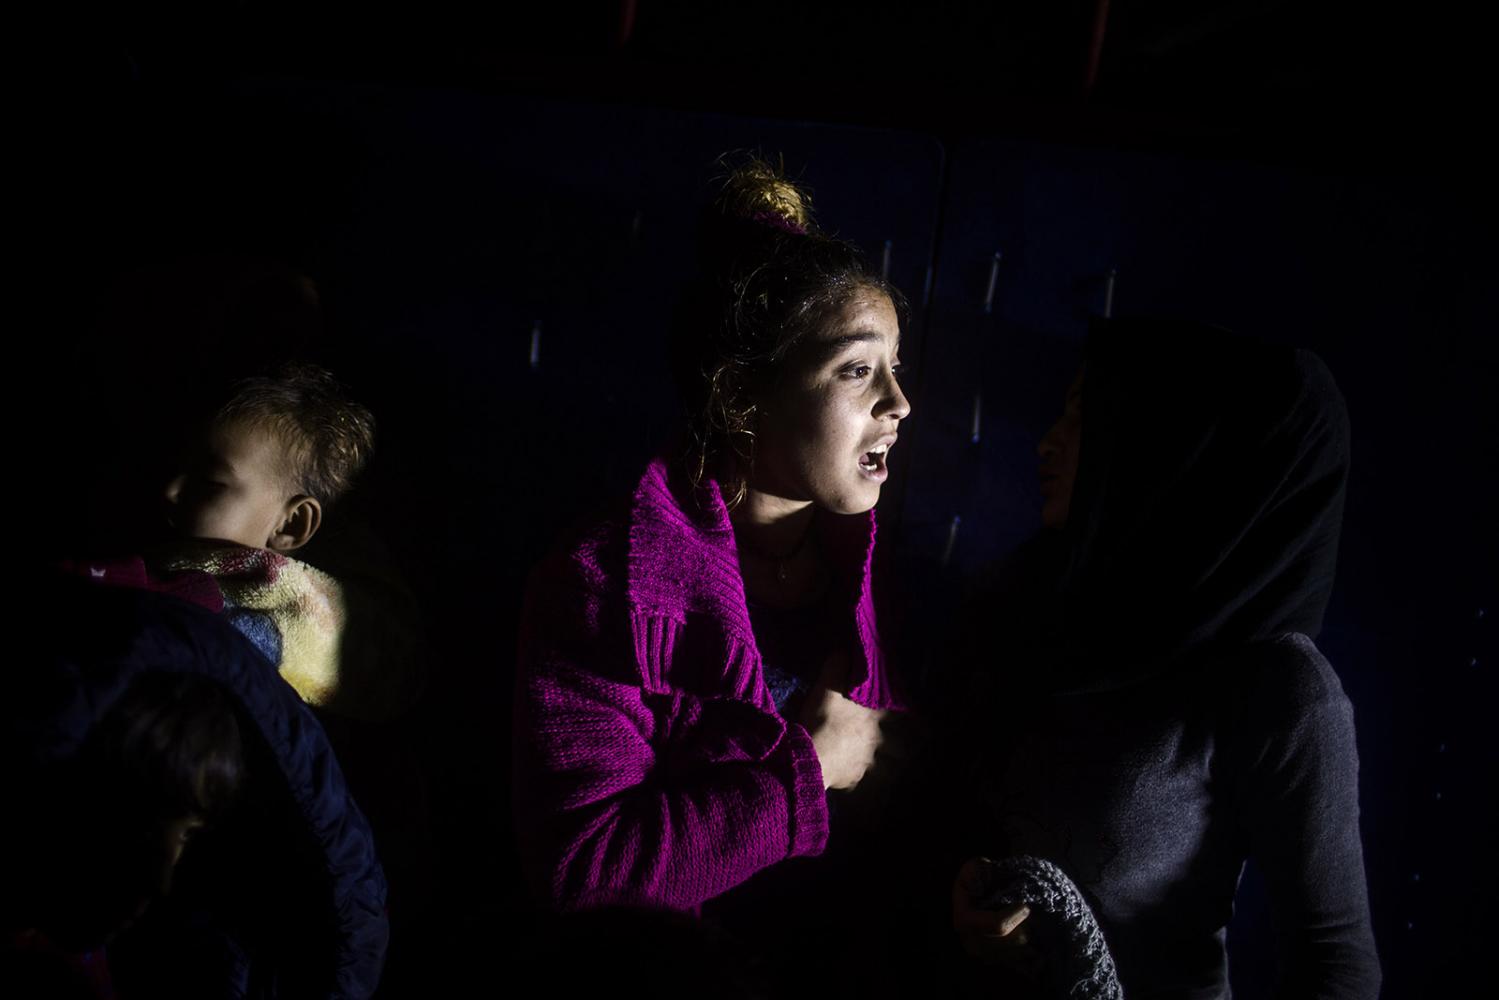 Storm - A Syrian refugee is seen inside a truck on her way to a...